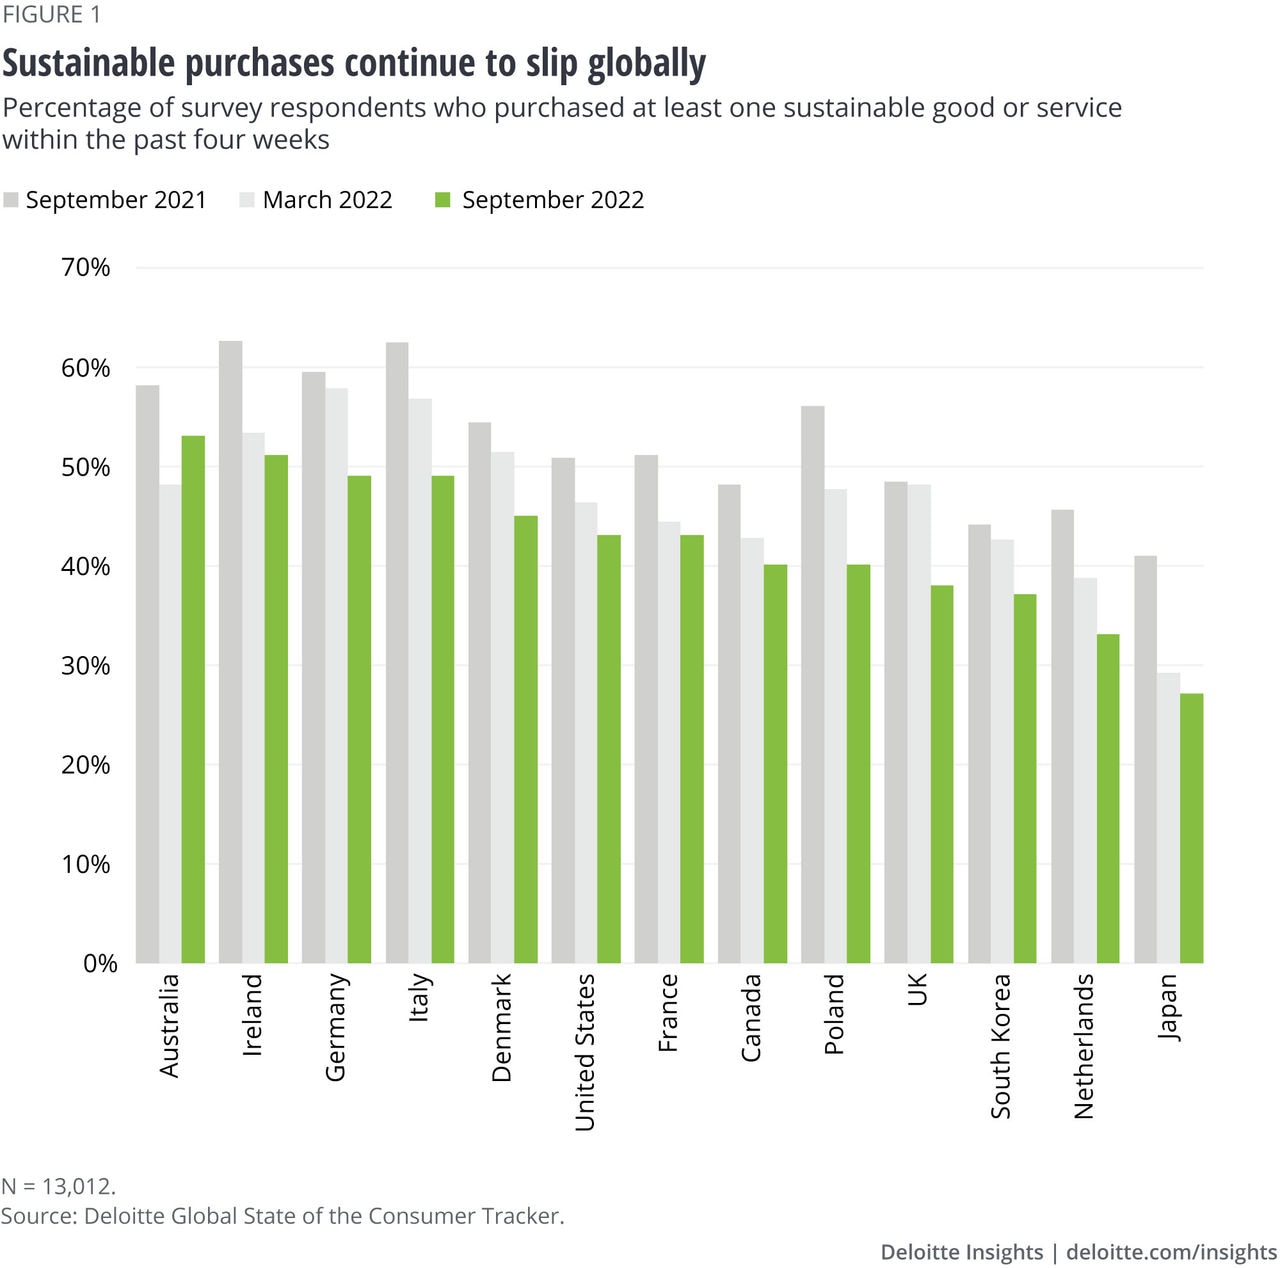 Figure 1. Sustainable purchases continue to slip globally